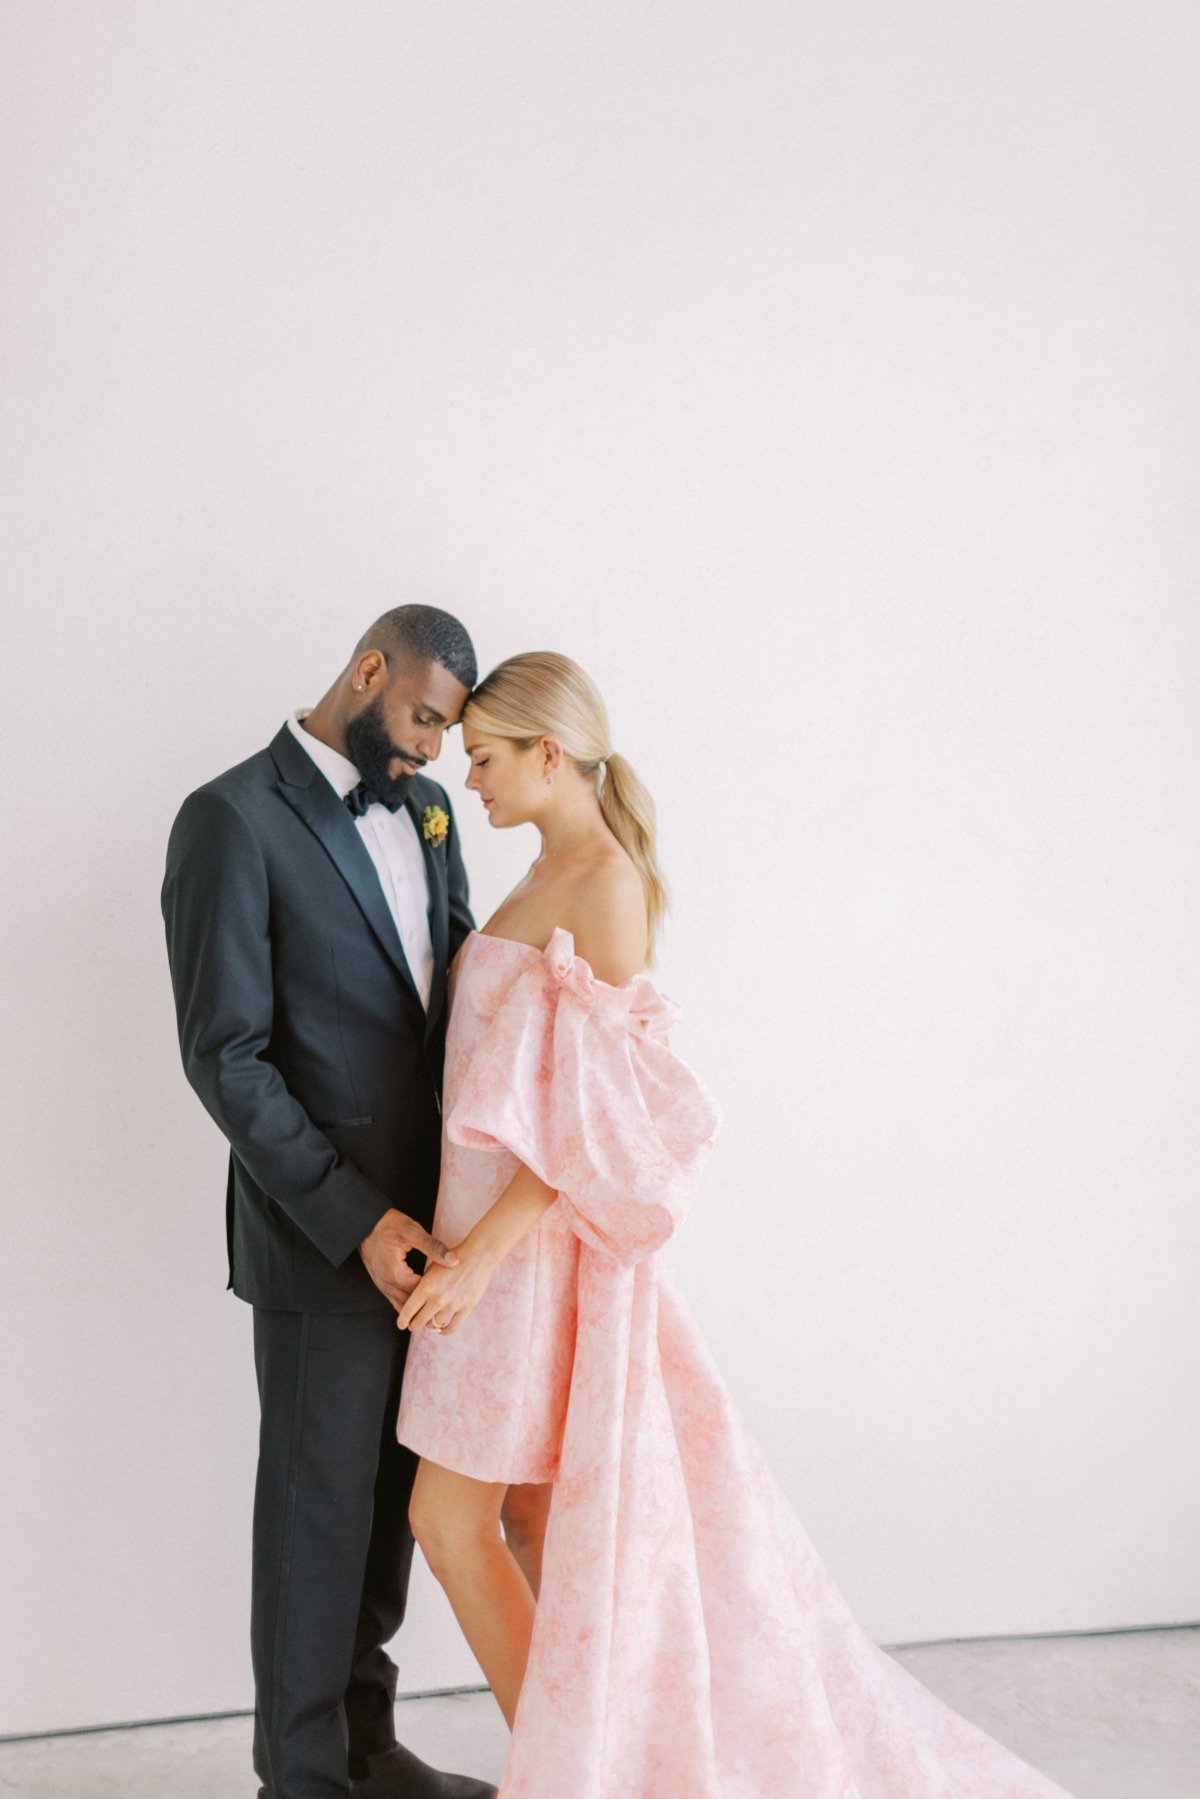 Groom and bride face to face with bride in pink off the shoulder dress